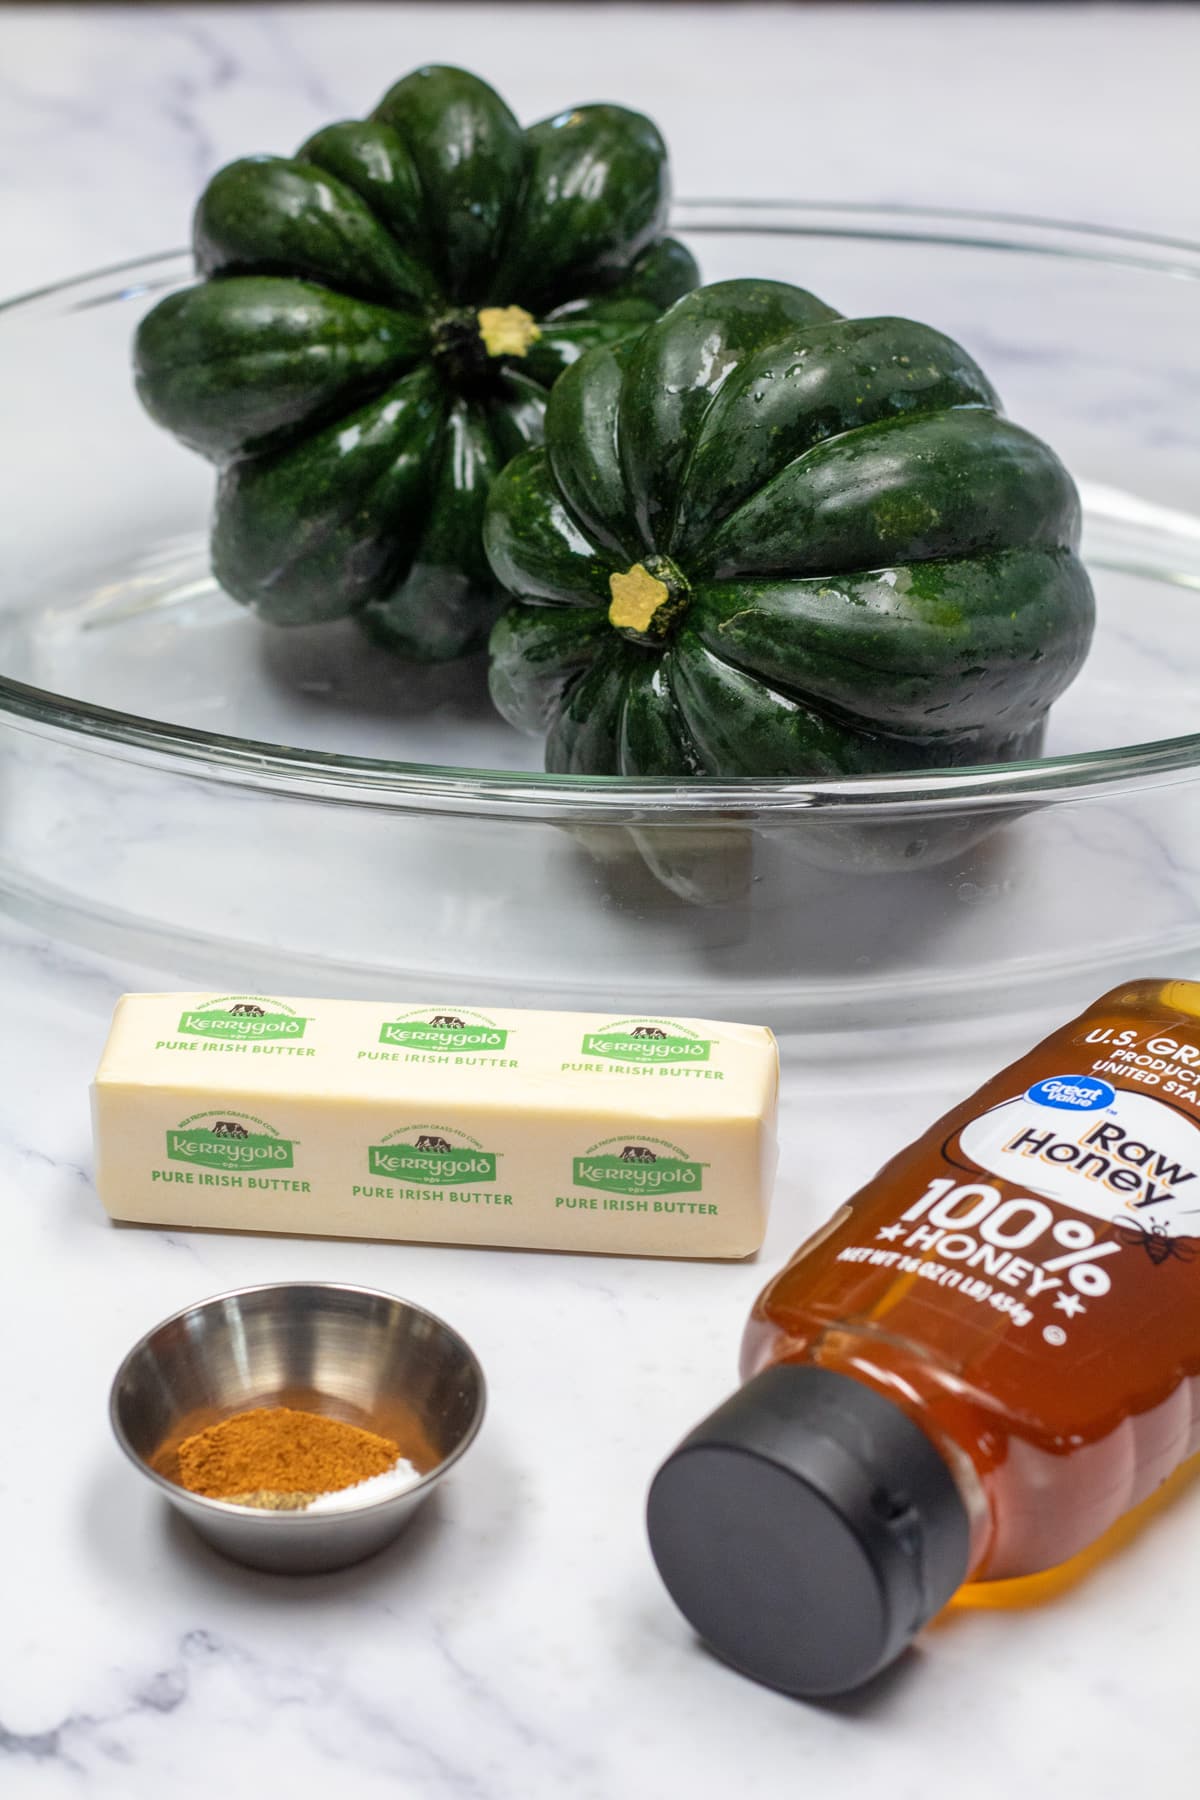 Tall image showing ingredients needed for honey roasted acorn squash.